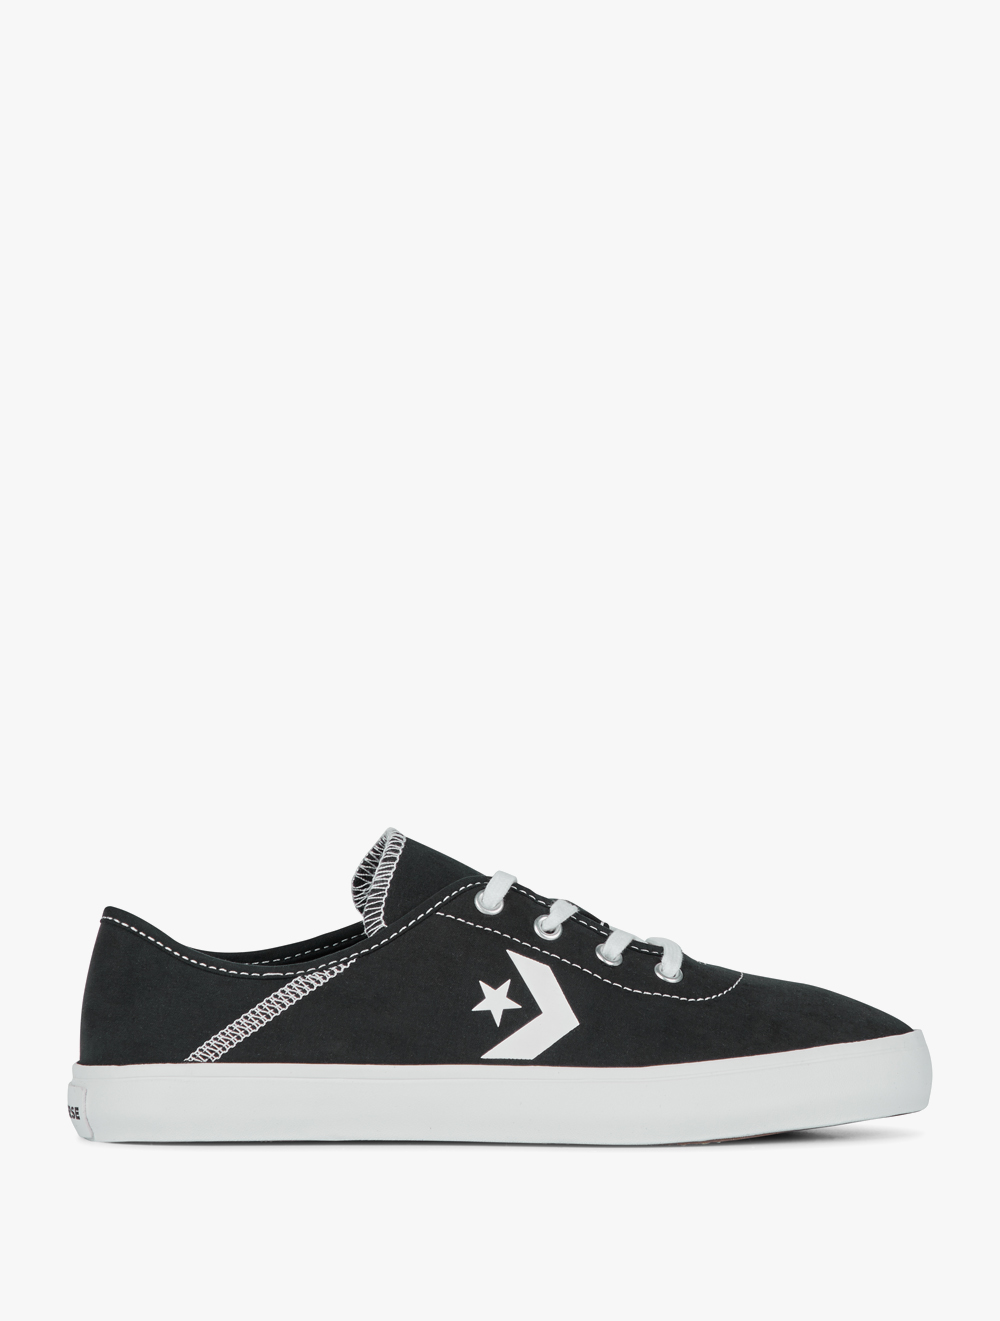 Shop Women's Shoes From Converse Planet Sports on Mapemall.com